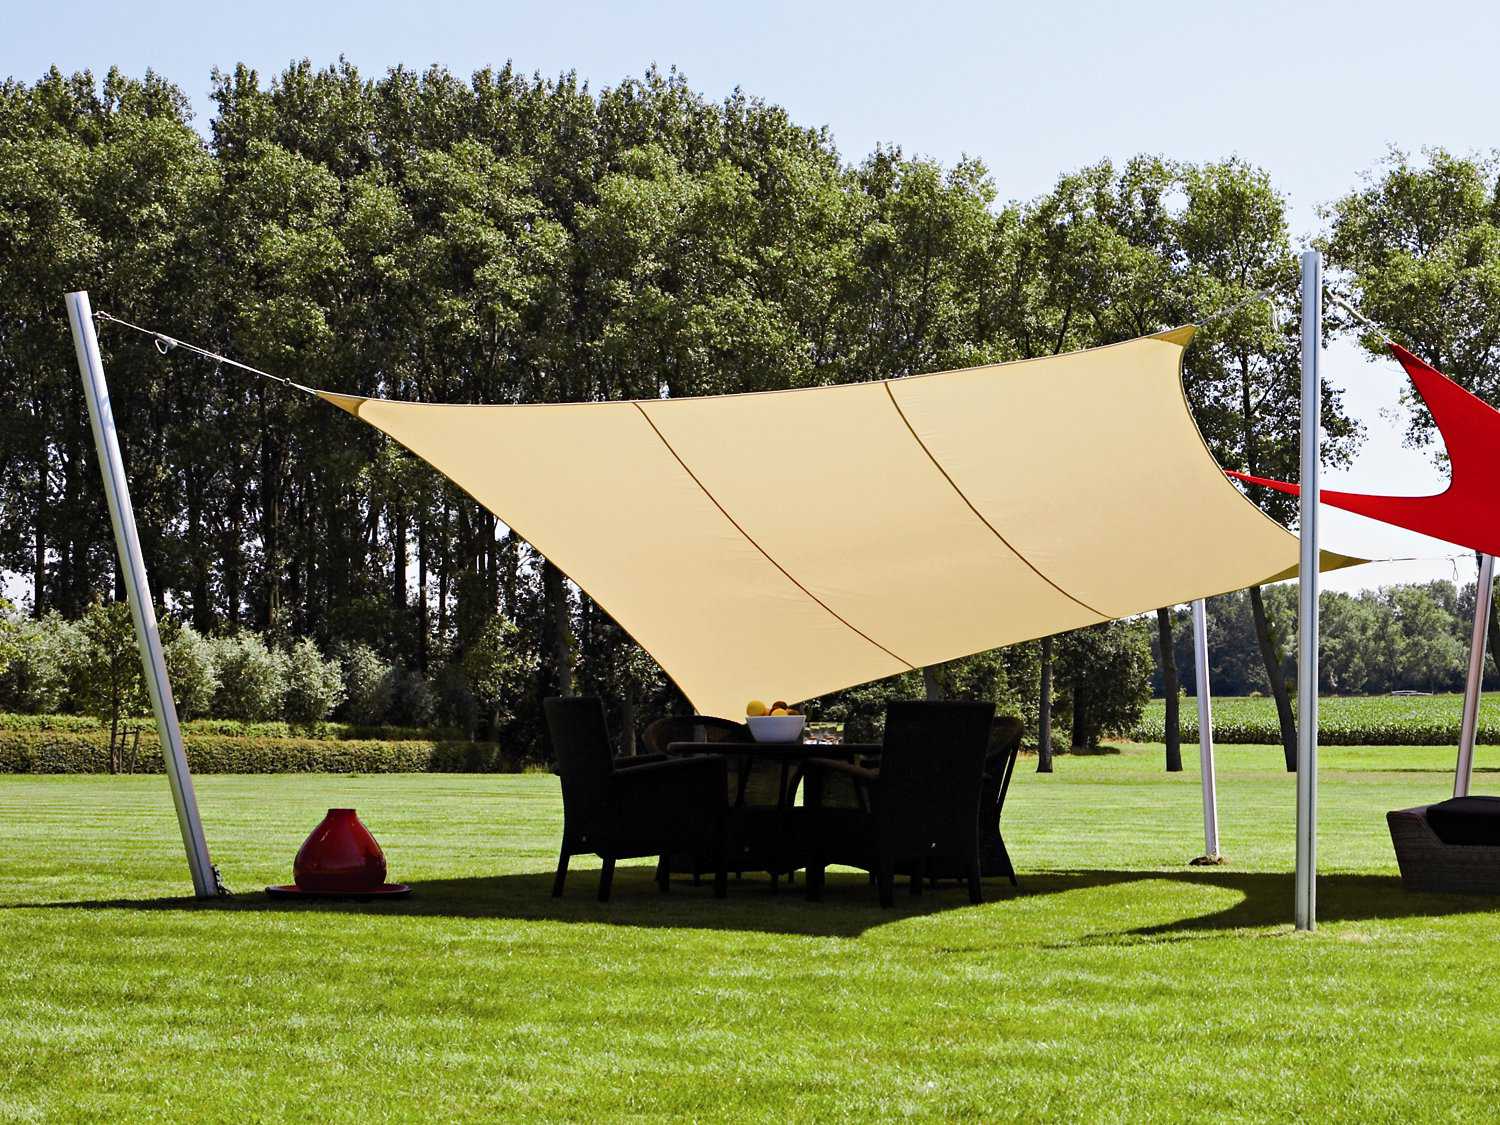 Customer Round Up: 10 High-End Patio Umbrella Set Ups That Will Inspire You  - Poggesi® USA